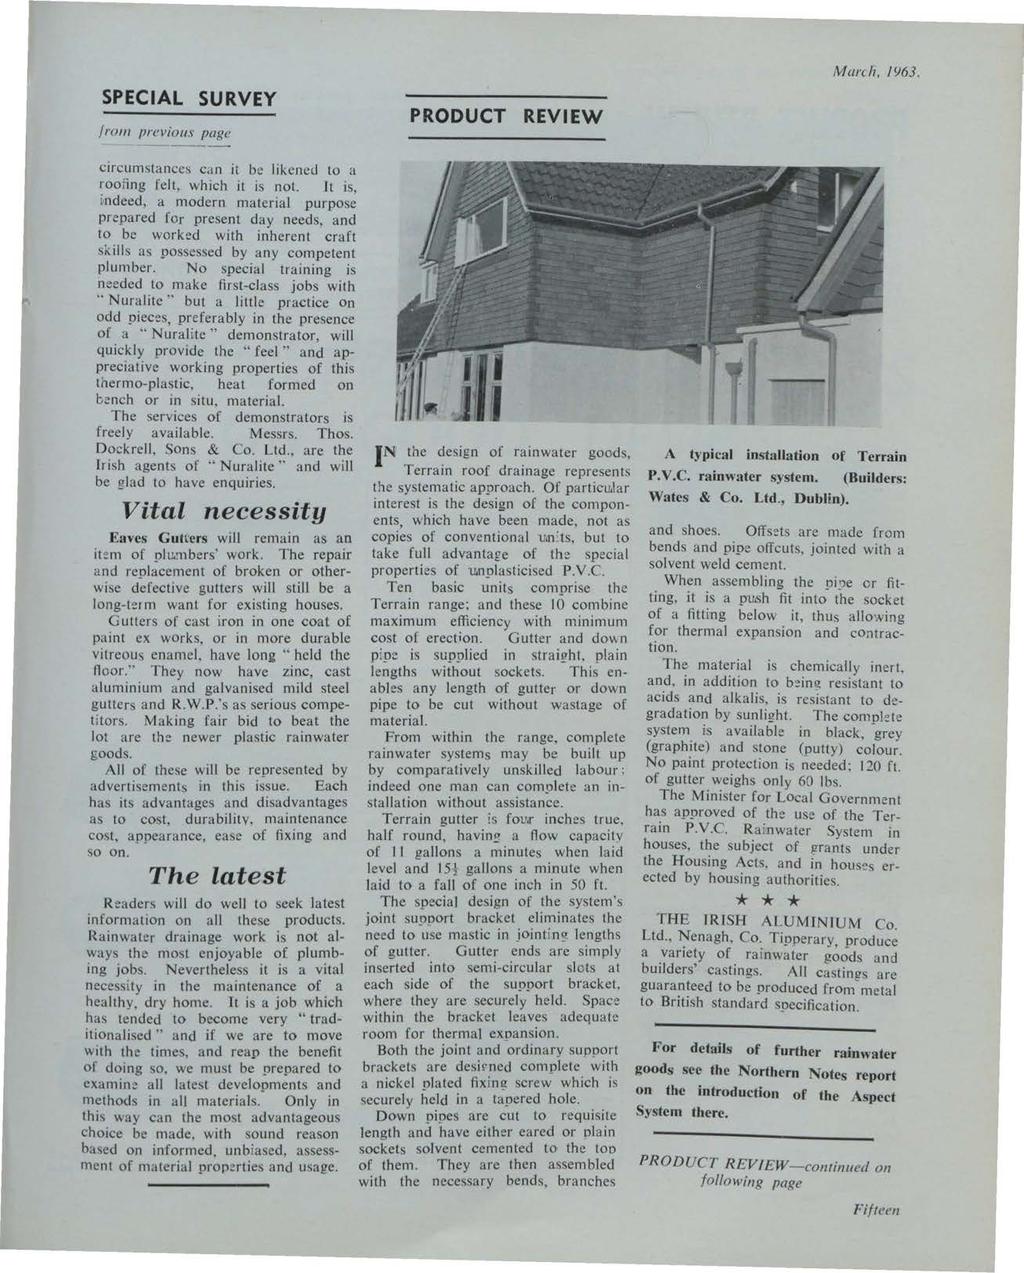 SPECIAL SURVEY /ro111 previous page et al.: The Irish Plumber and Heating Contractor, March 1963 (complete is PRODUCT REVIEW March, IY63.